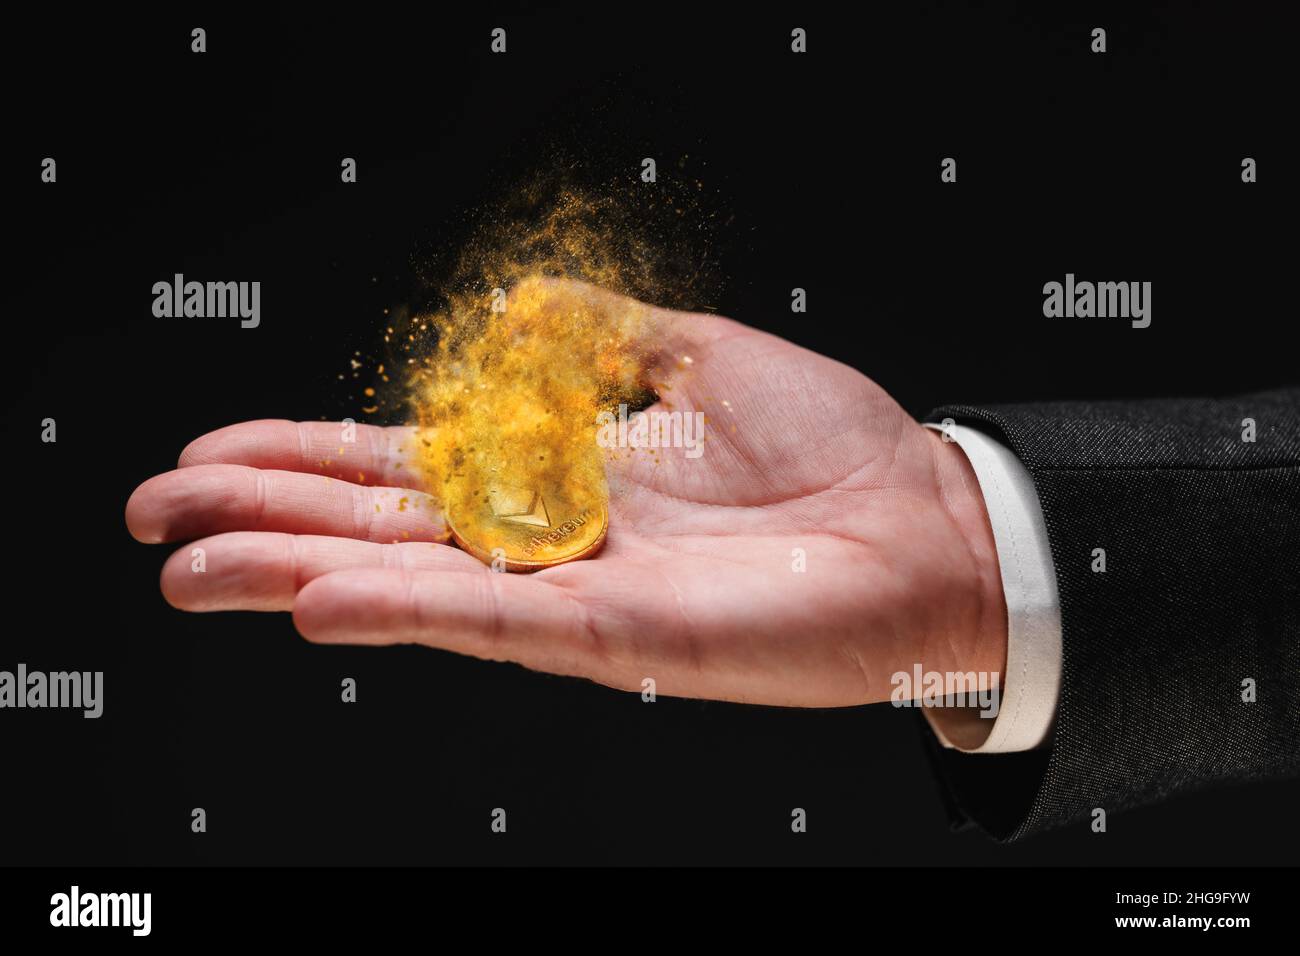 Ethereum cryptocurrency loosing value, investor holding crypto currency dissolving coin in hand, conceptual image with selective focus Stock Photo